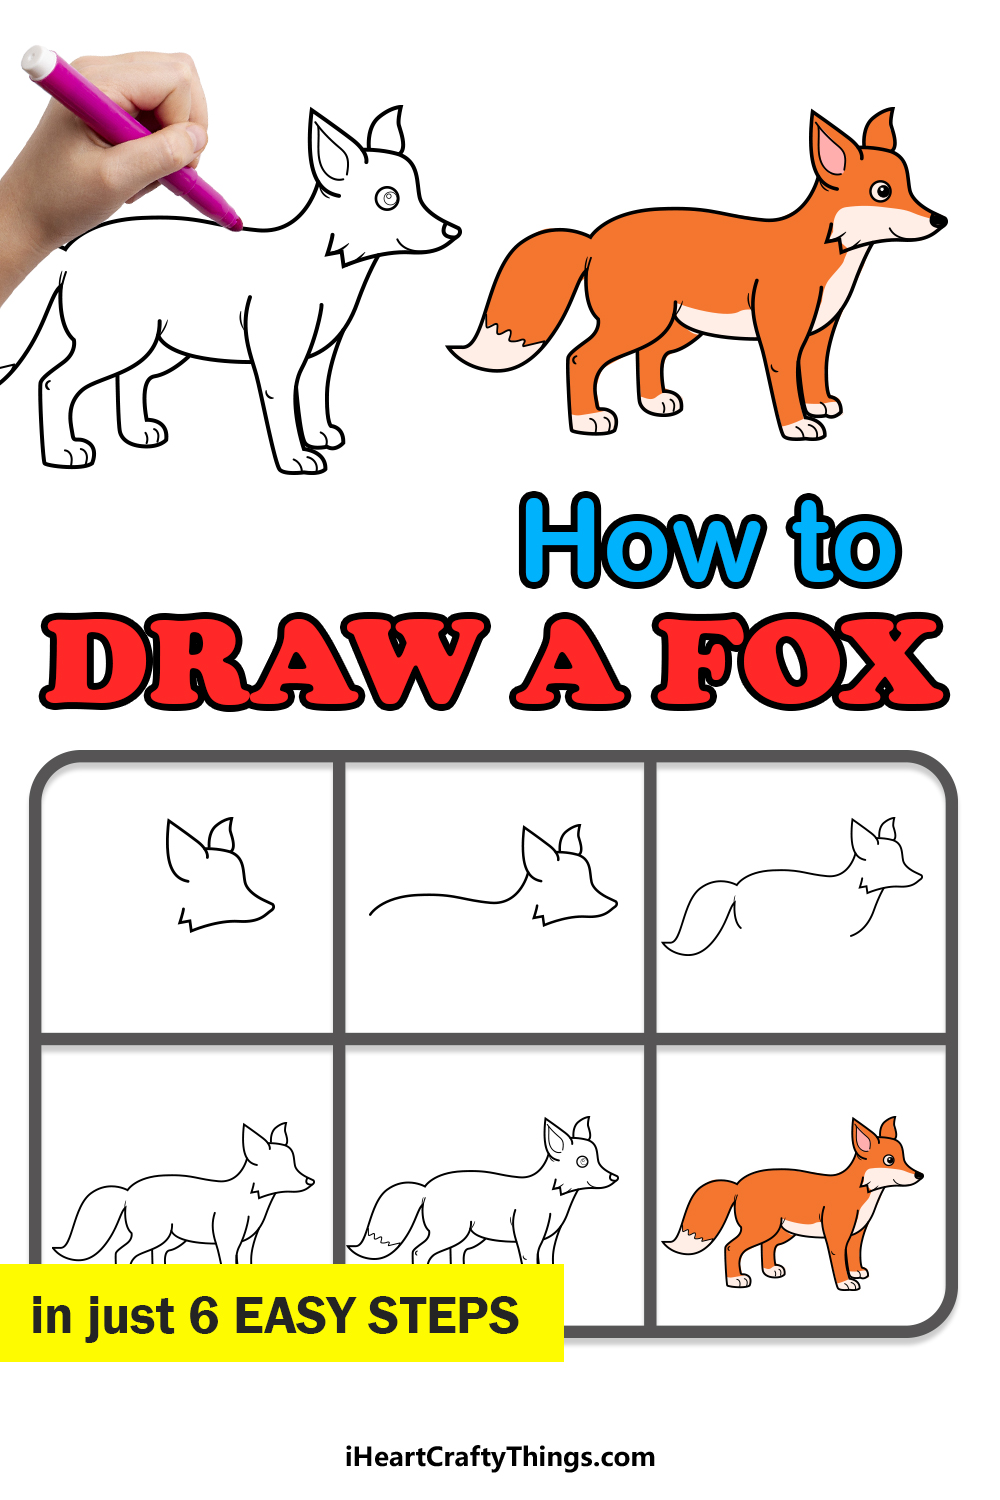 how to draw a fox in 6 easy steps